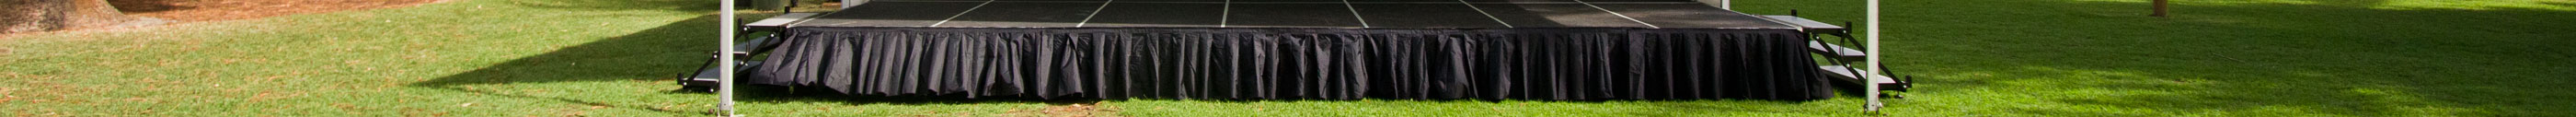 Stage-banner